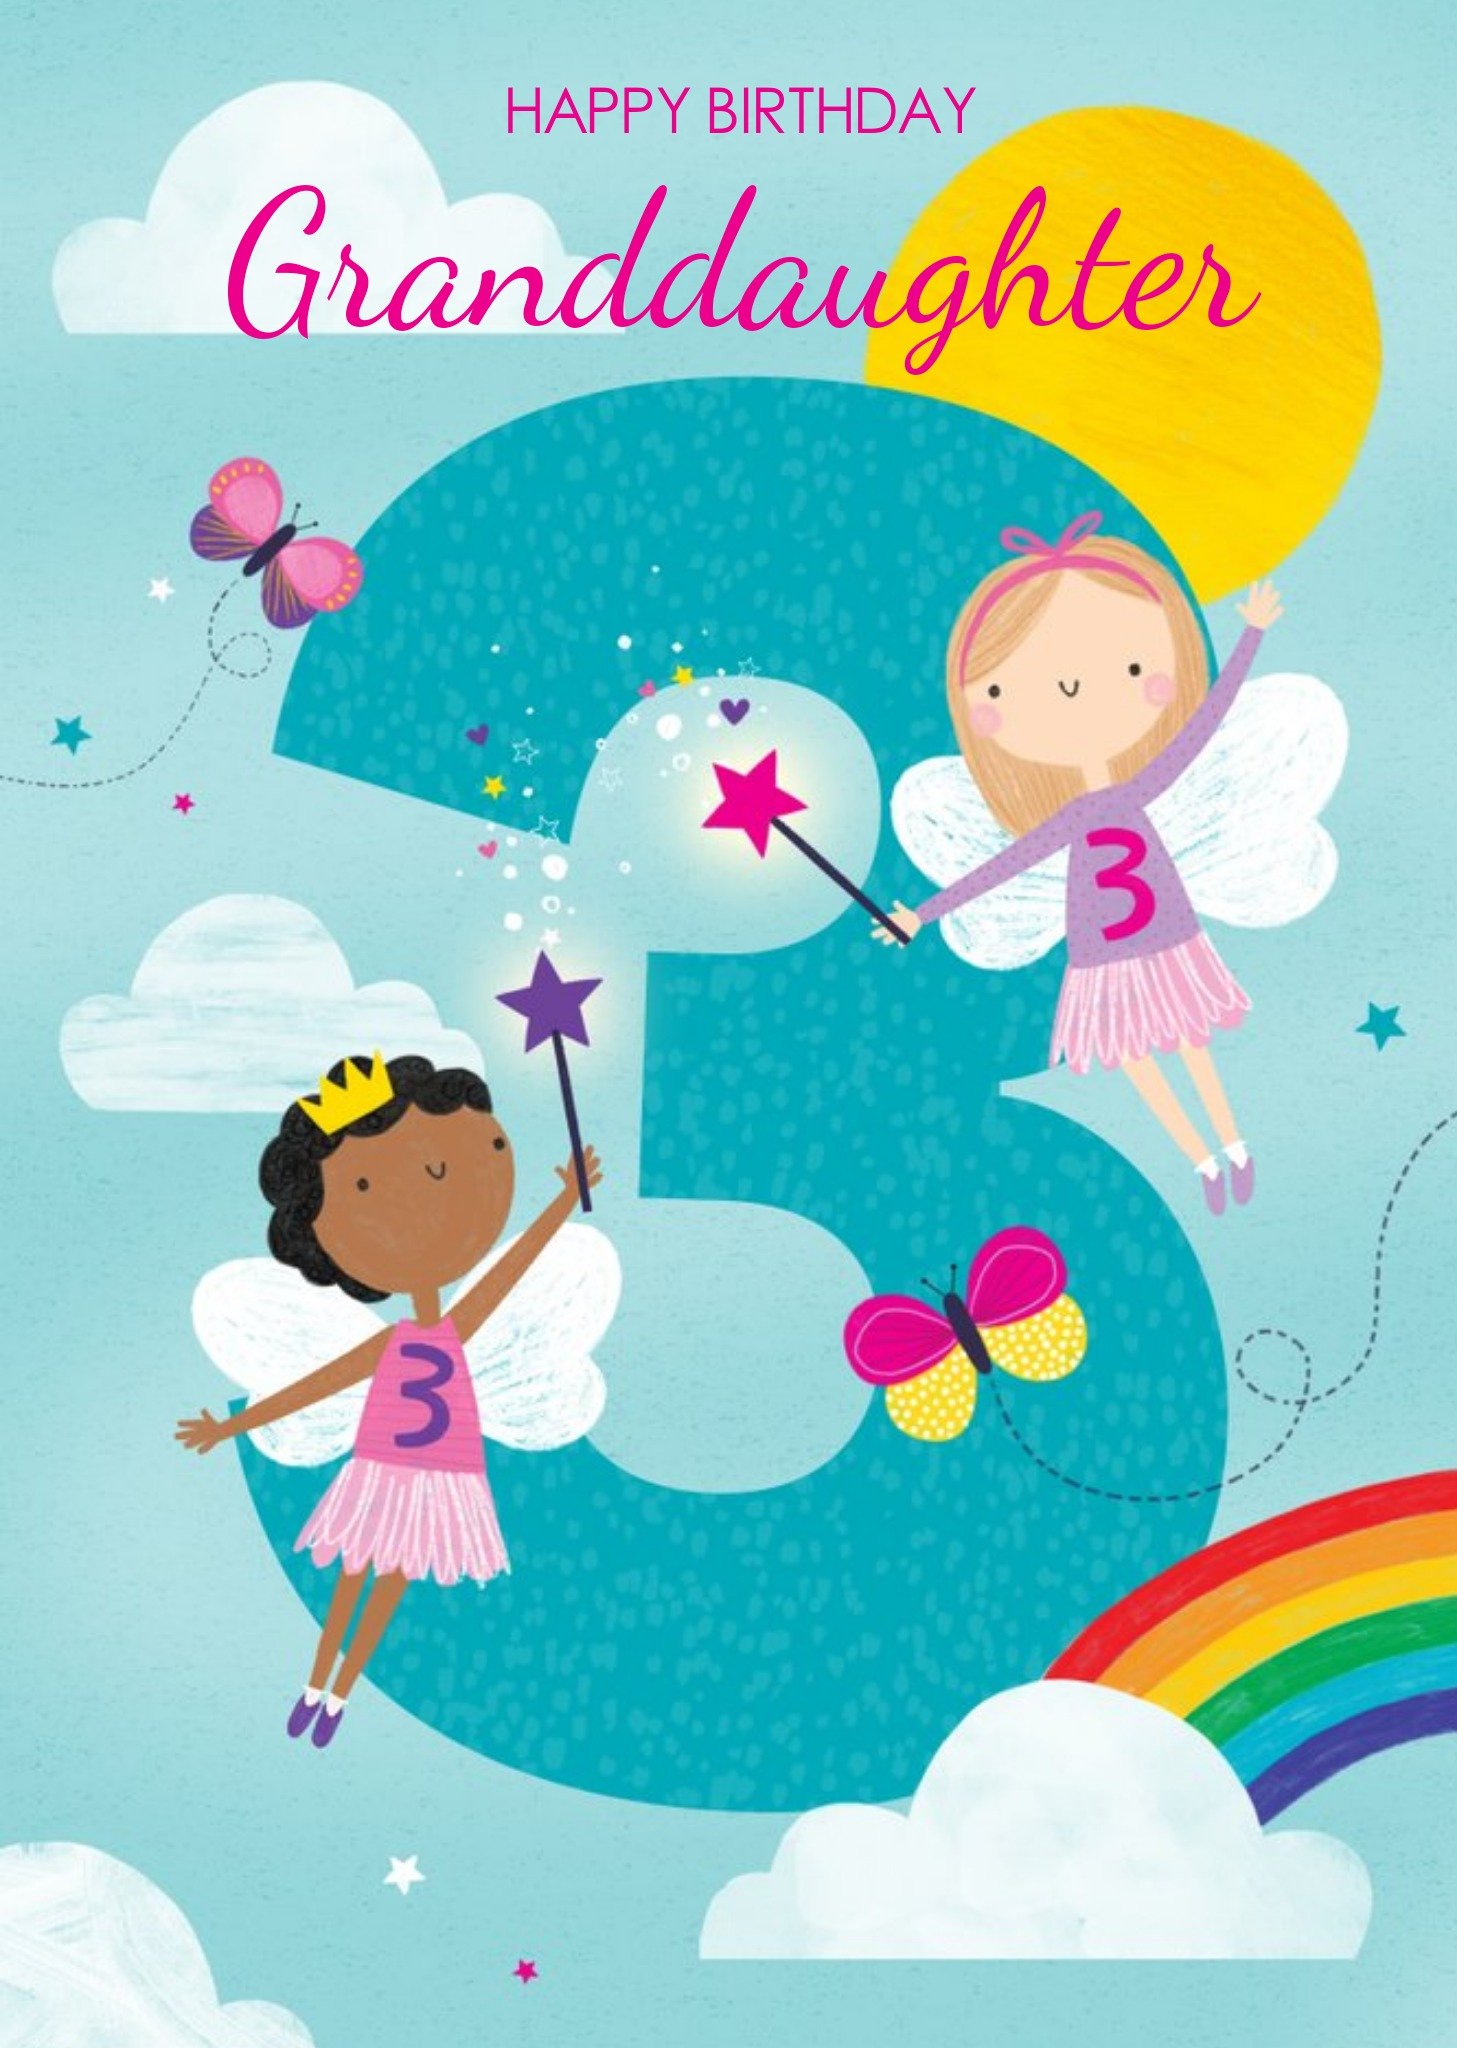 Moonpig Fairy Granddaughter Magical 3rd Birthday Card From Paperlink Ecard